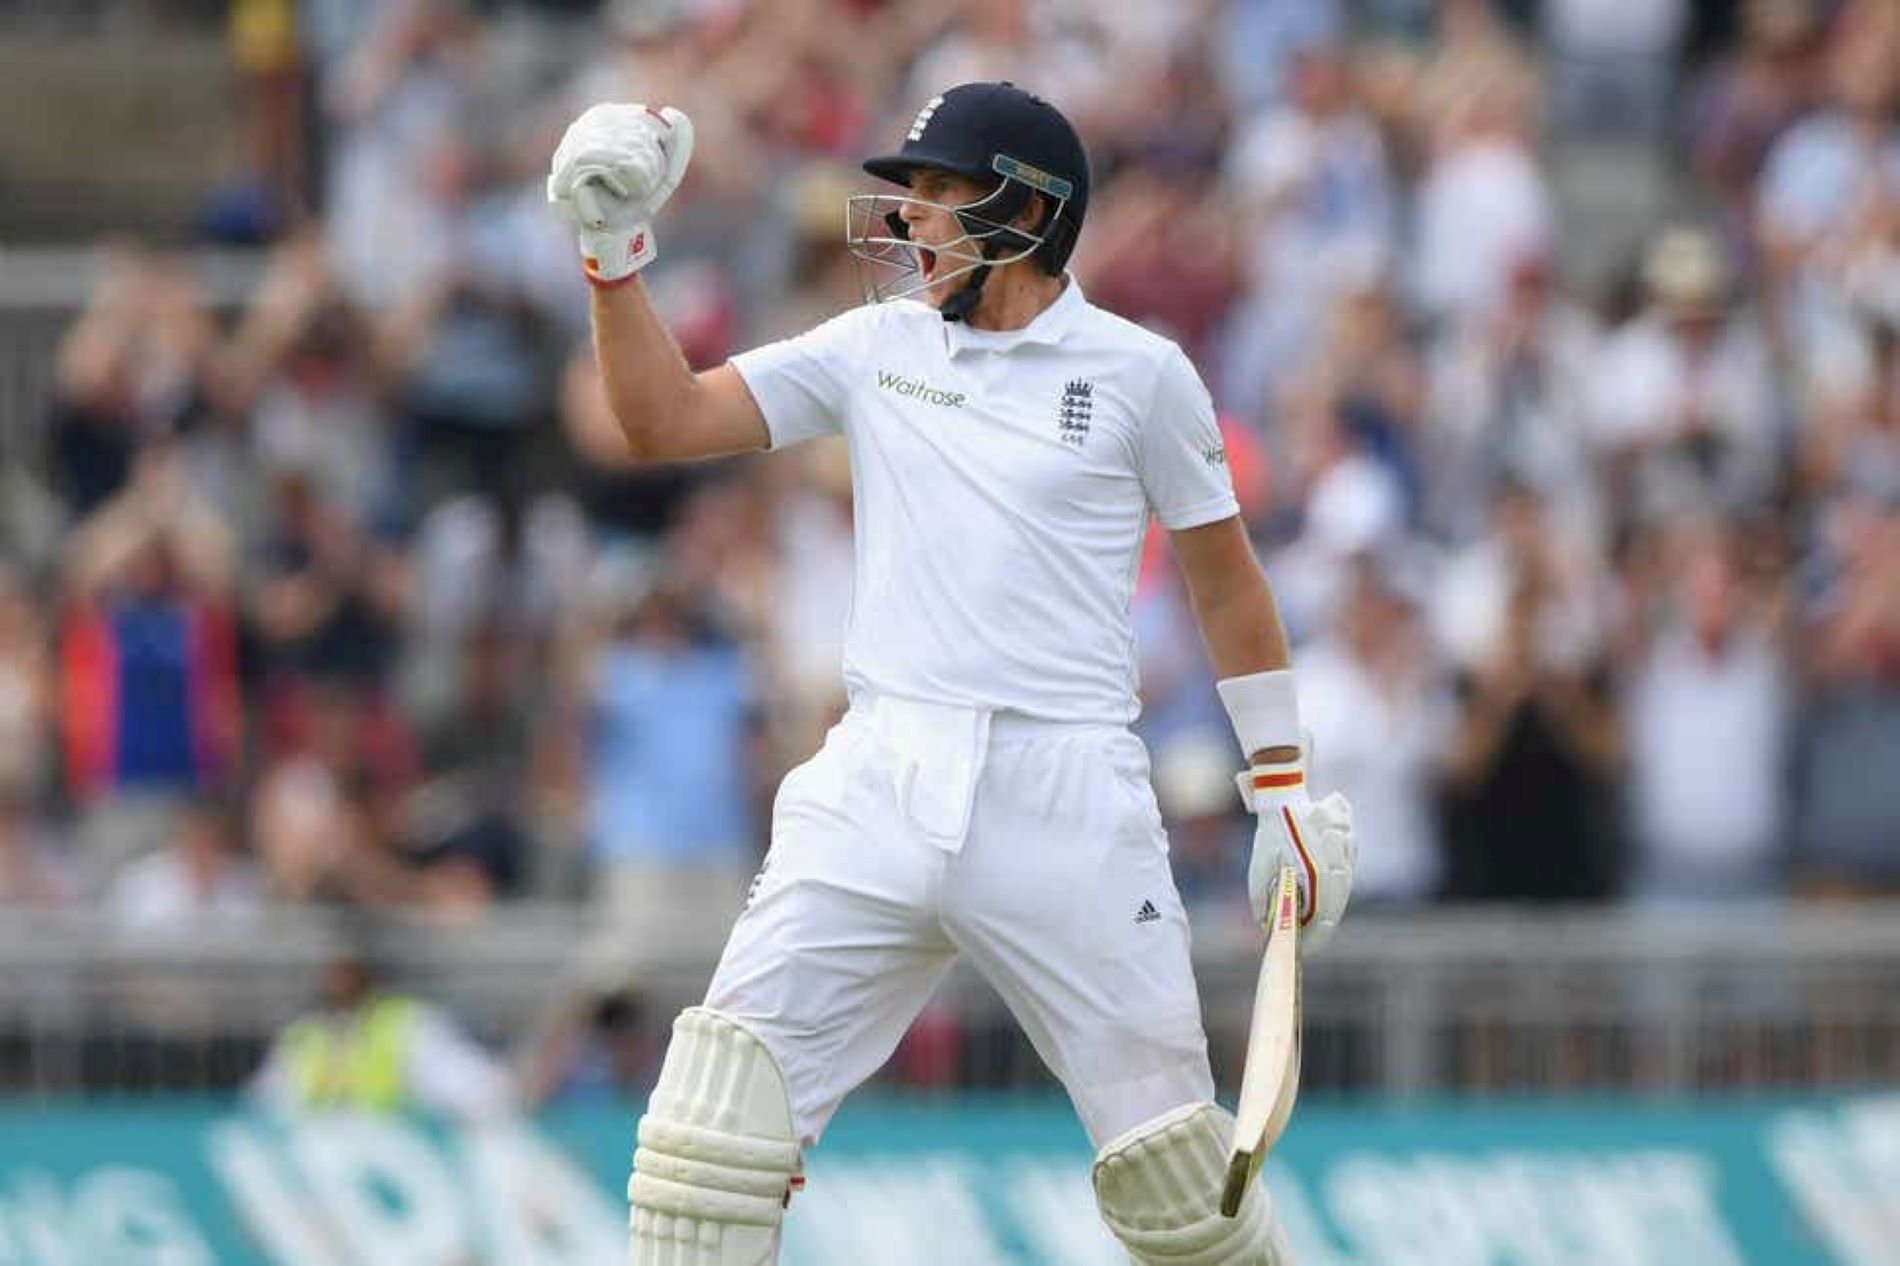 Joe Root achieved his highest Test score batting at No.3